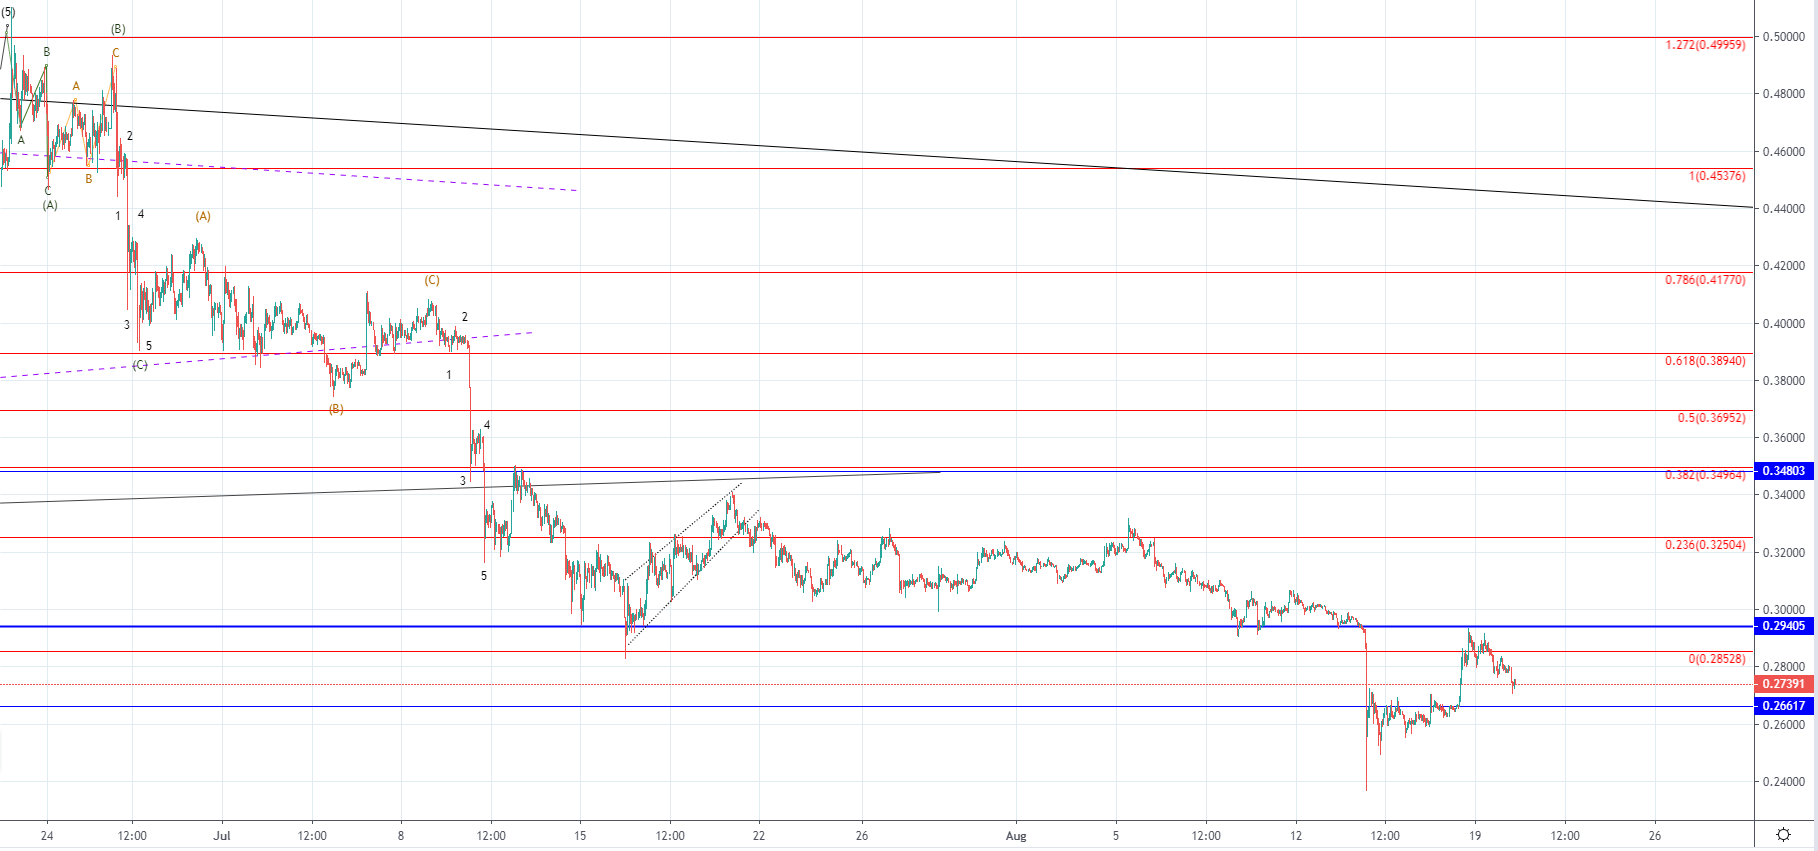 BTC and XRP - Downtrend likely to continue.